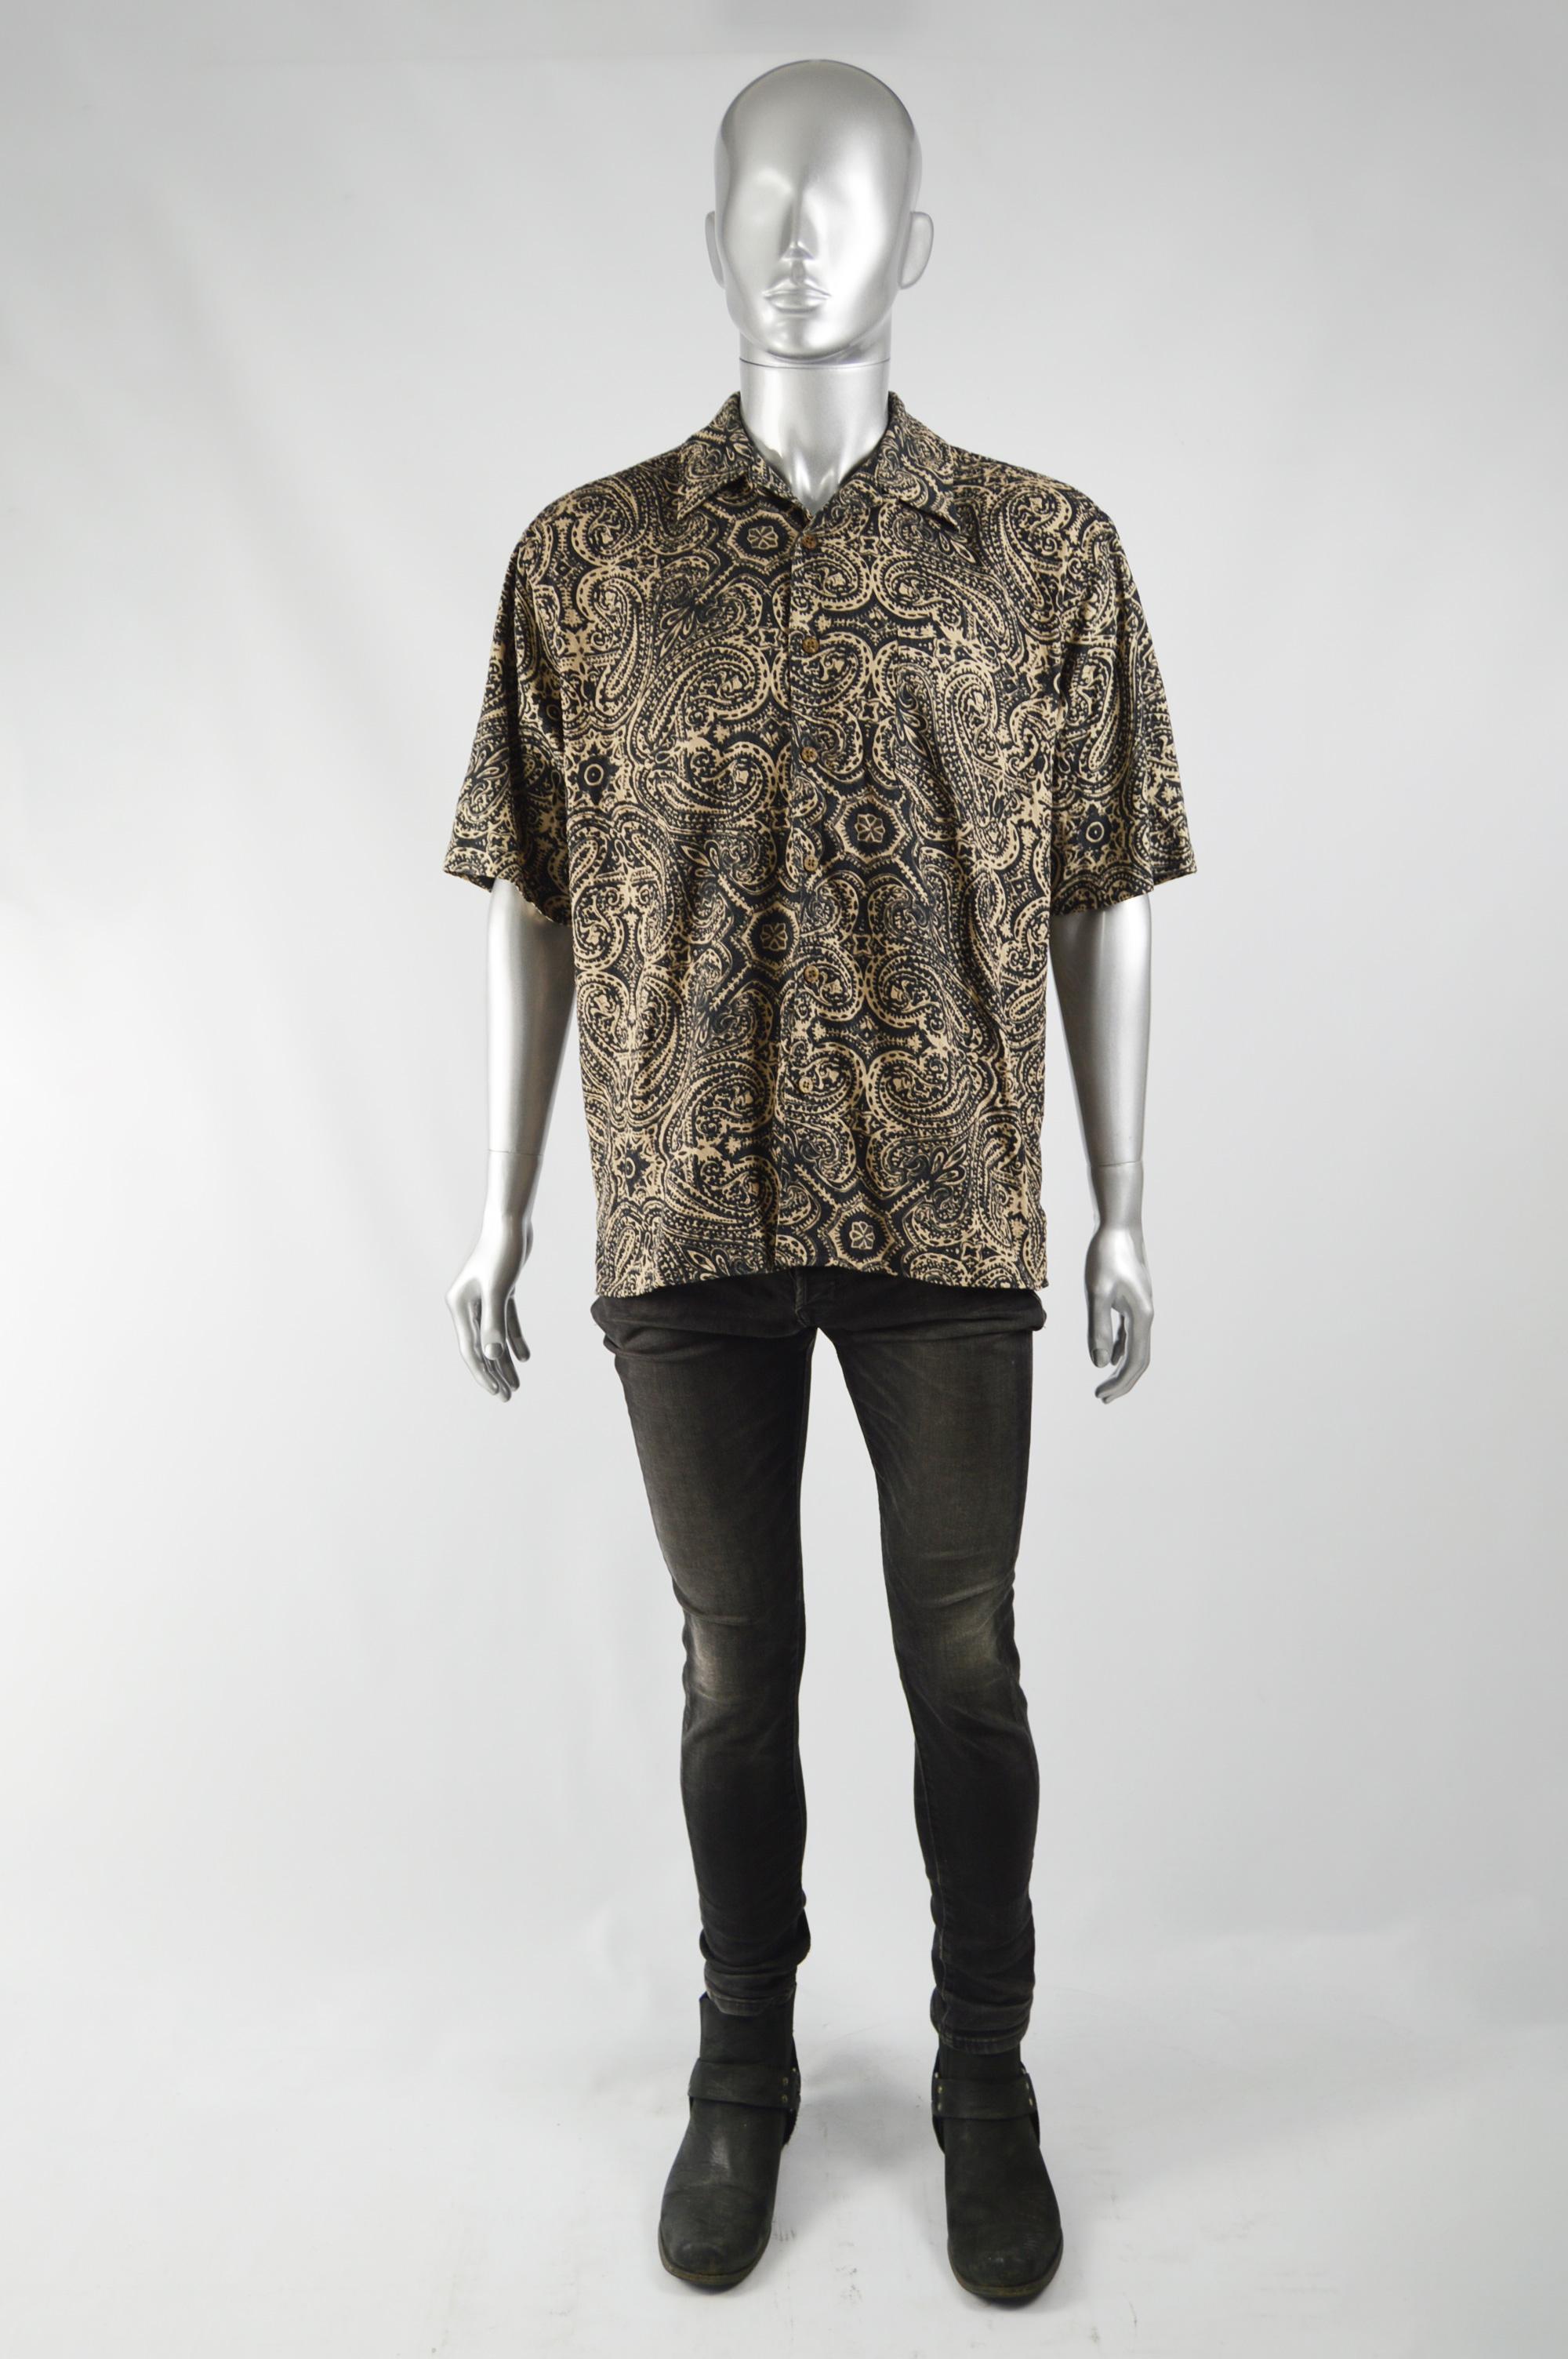 A stylish vintage mens shirt from the late 80s / early 90s by iconic American fashion designer, Bill Blass. In a pure silk noil with a paisley batik print, oversized fit and short sleeves. 

Size: Marked M but this gives an intentionally loose fit.